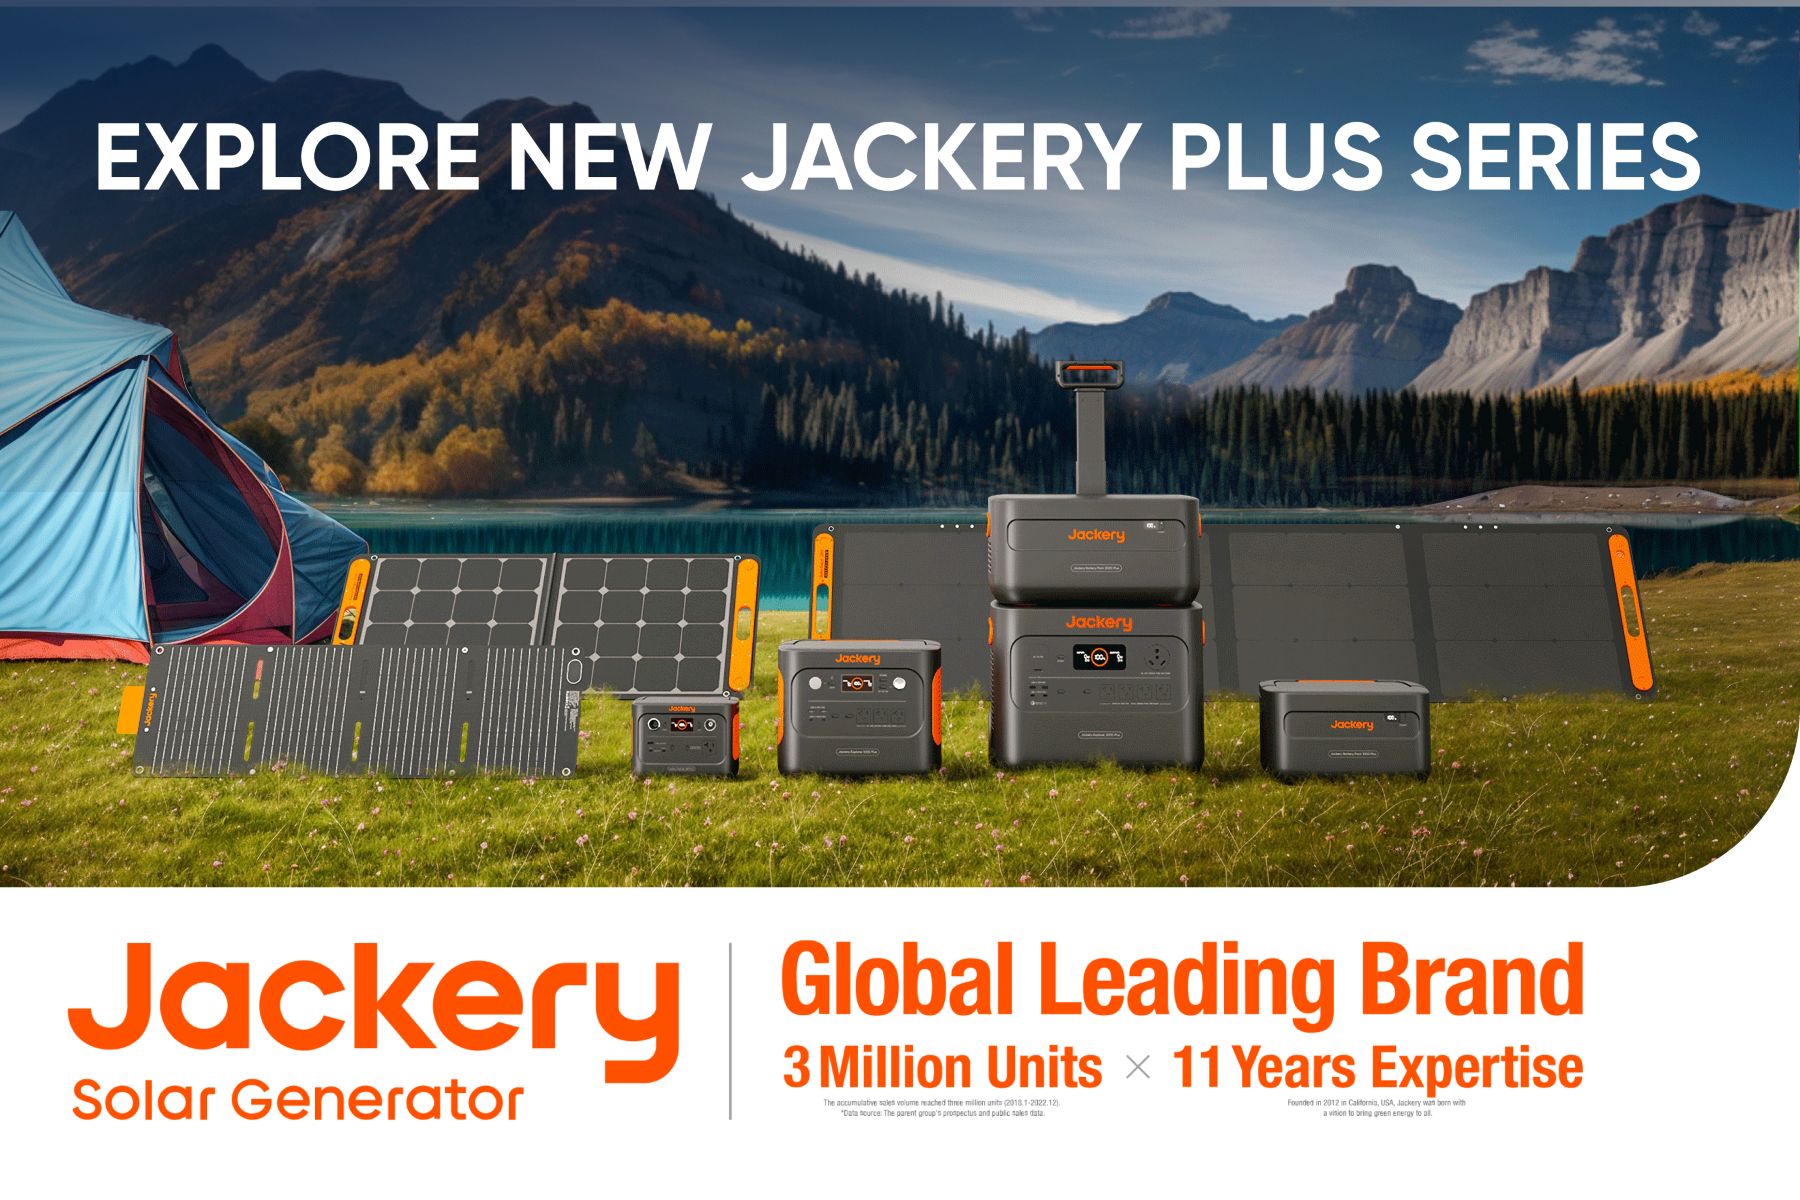 Jackery’s New Plus Line Redefines Power Convenience with World’s Lightest Solar Generator and Expandable Power